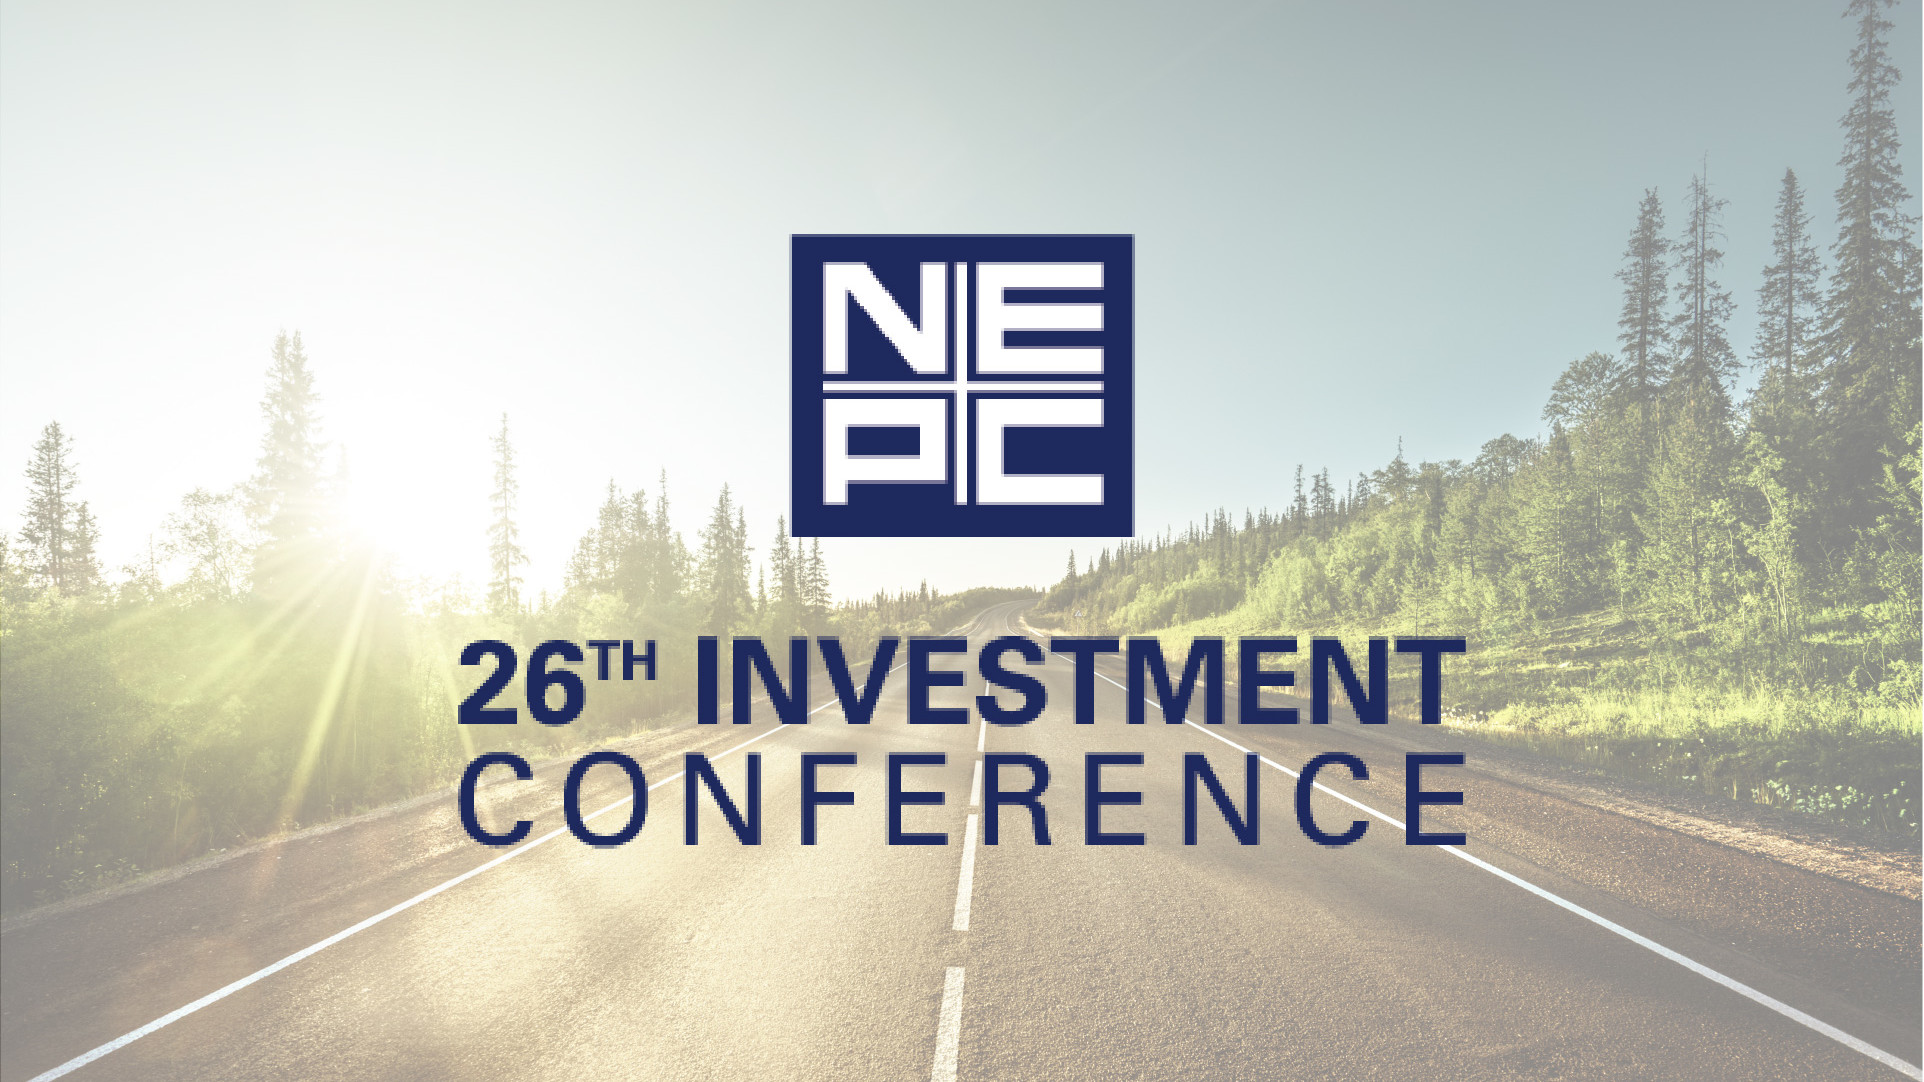 NEPC Client Investment Conference image of road with conference logo